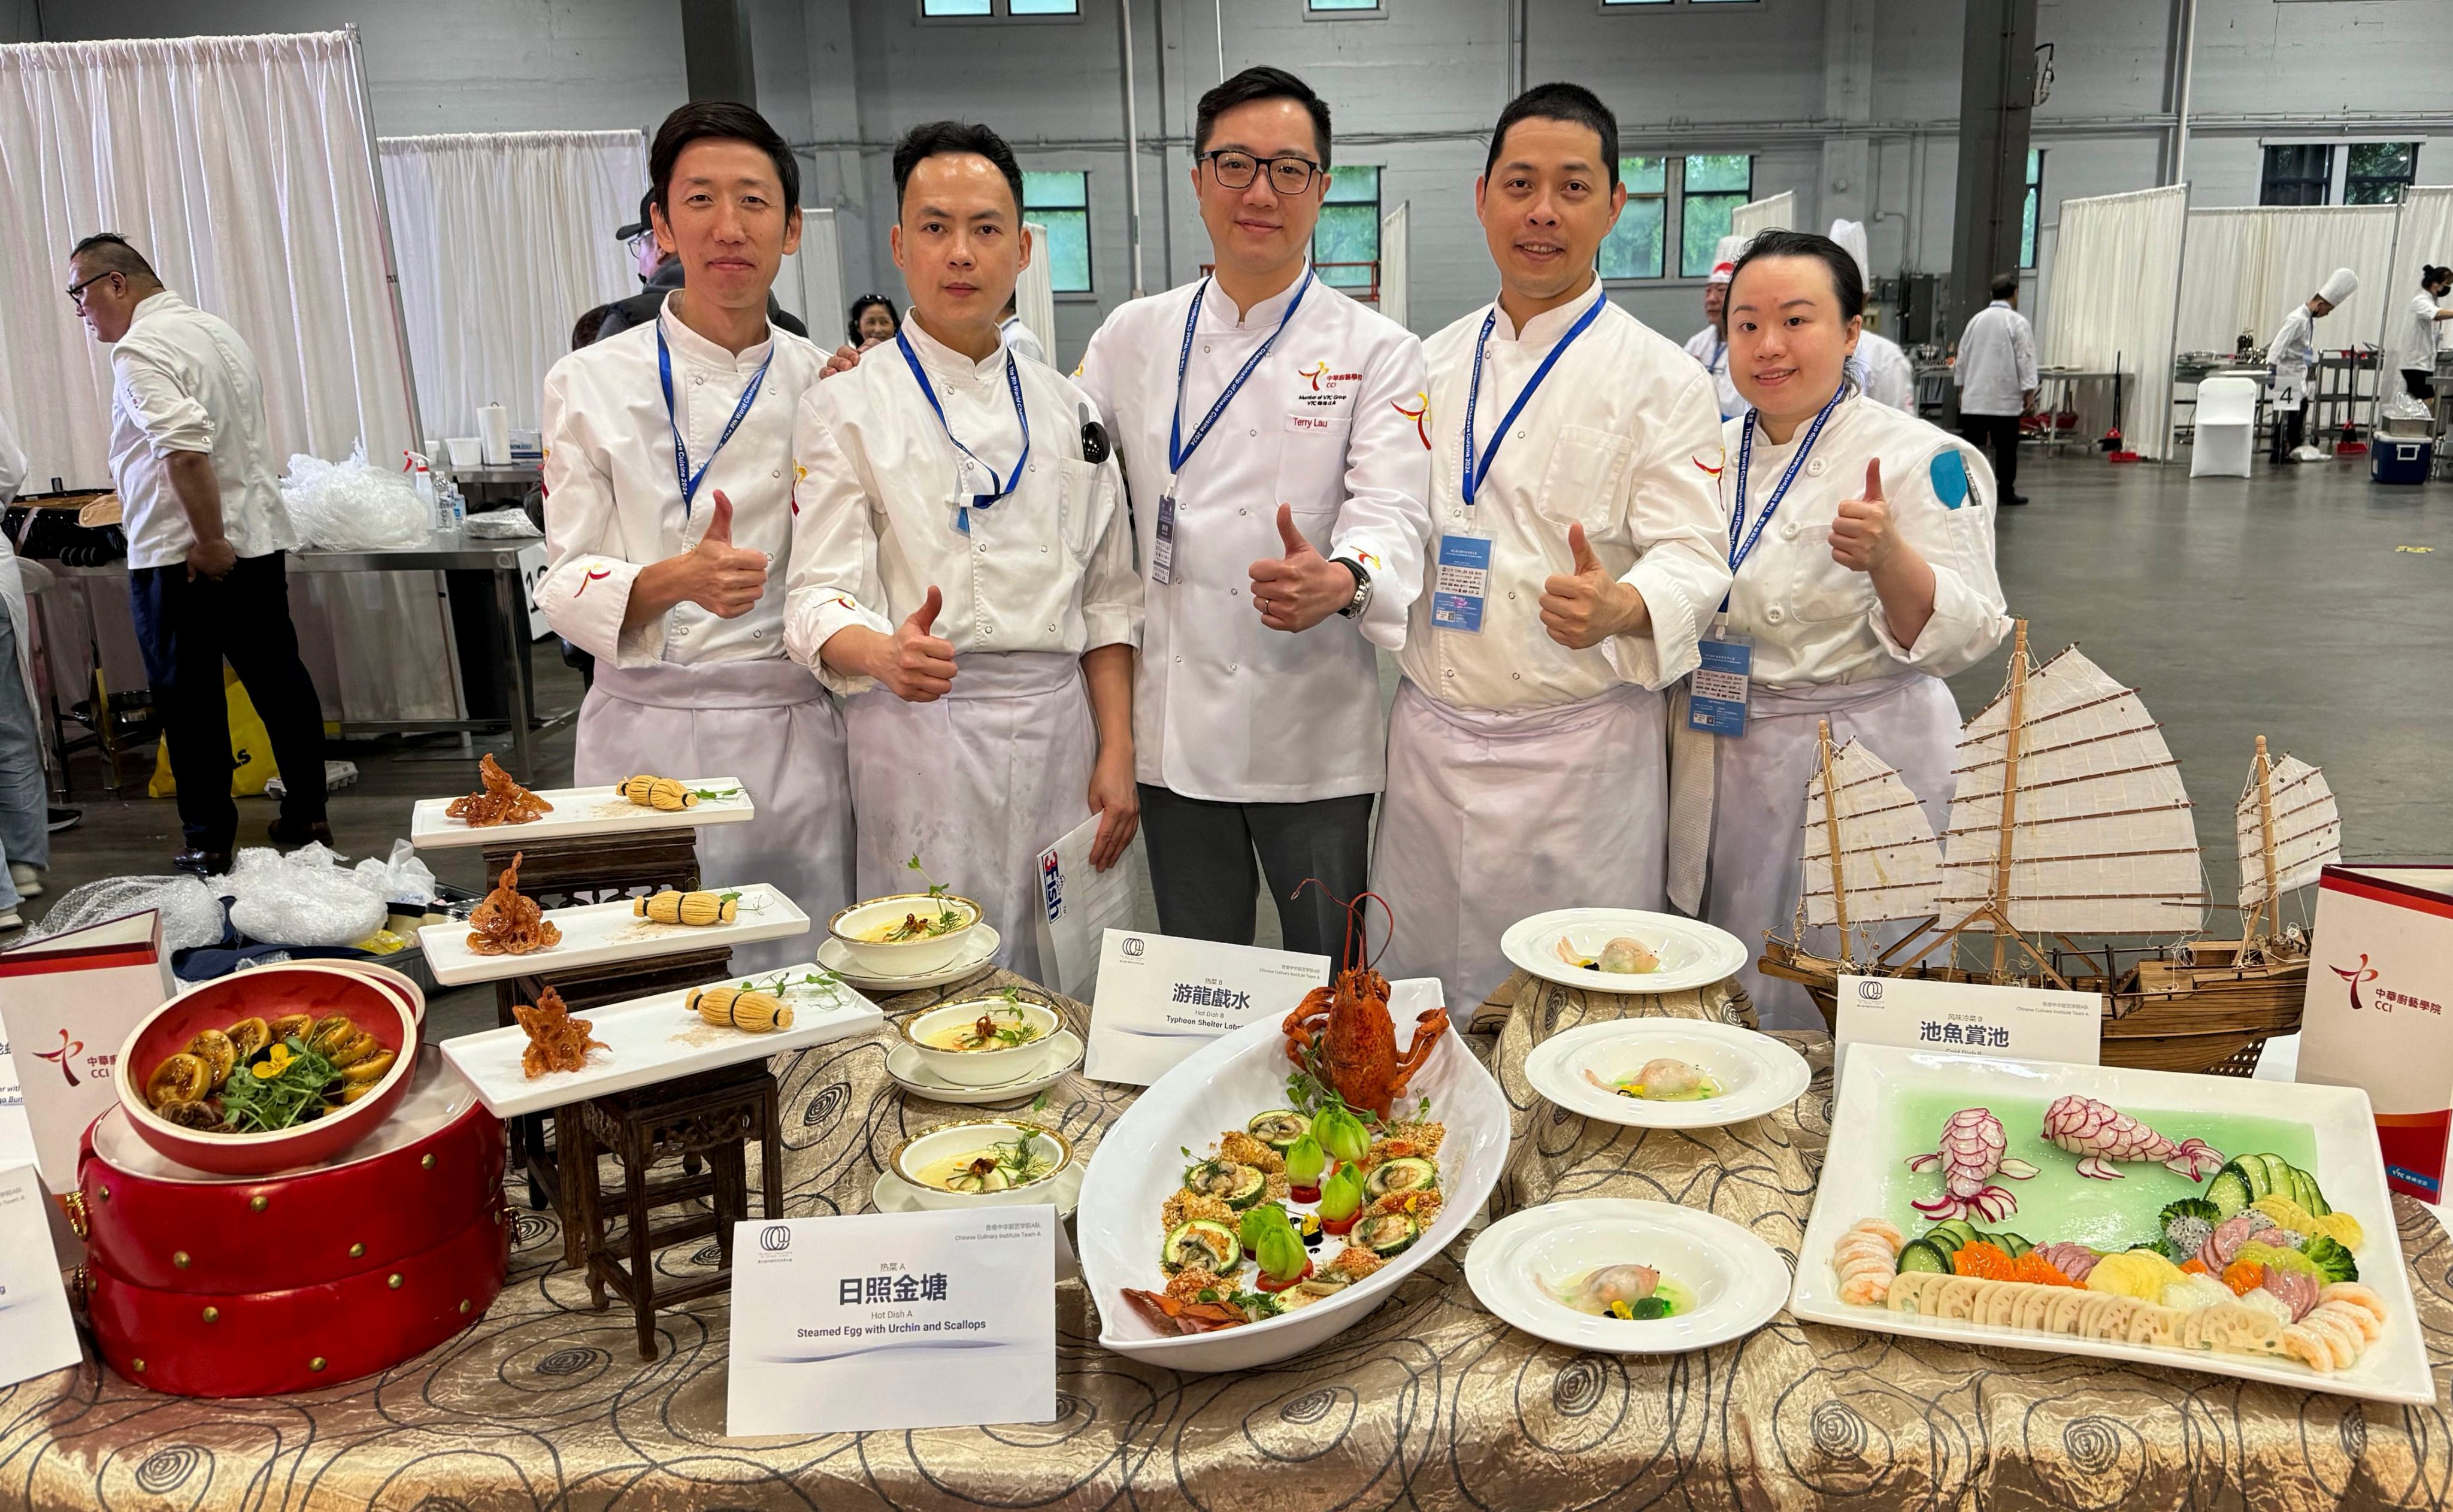 One of the teams from the Chinese Culinary Institute (CCI) has won gold in the group category. Photo: Handout